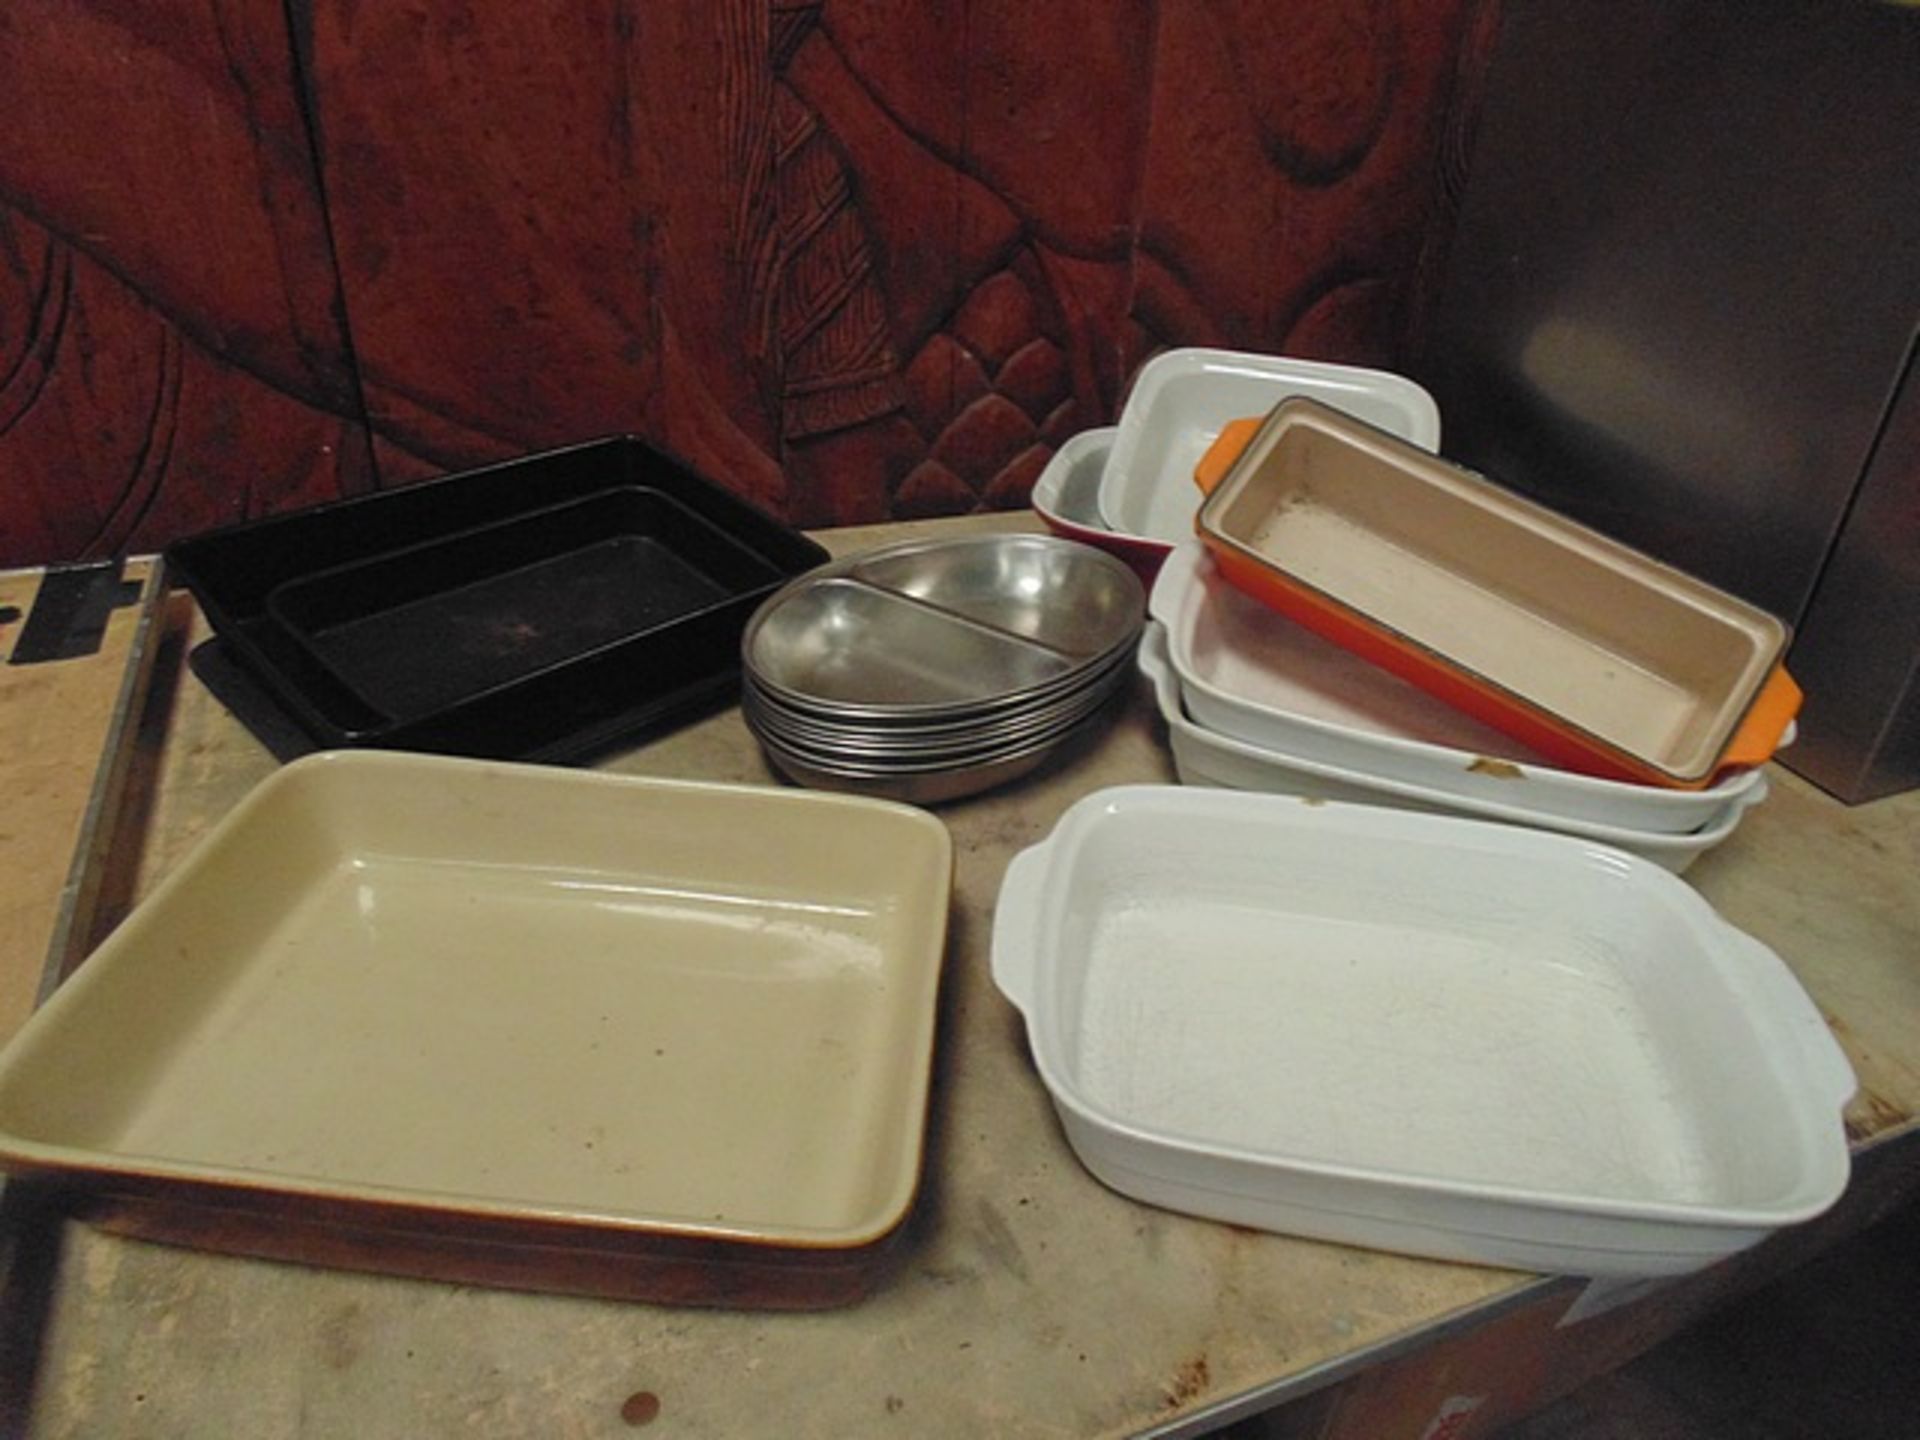 Job lot comprising of 7 x various Pyrex ceramic ovenware, 8 x stainless steel divided dishes and 4 x